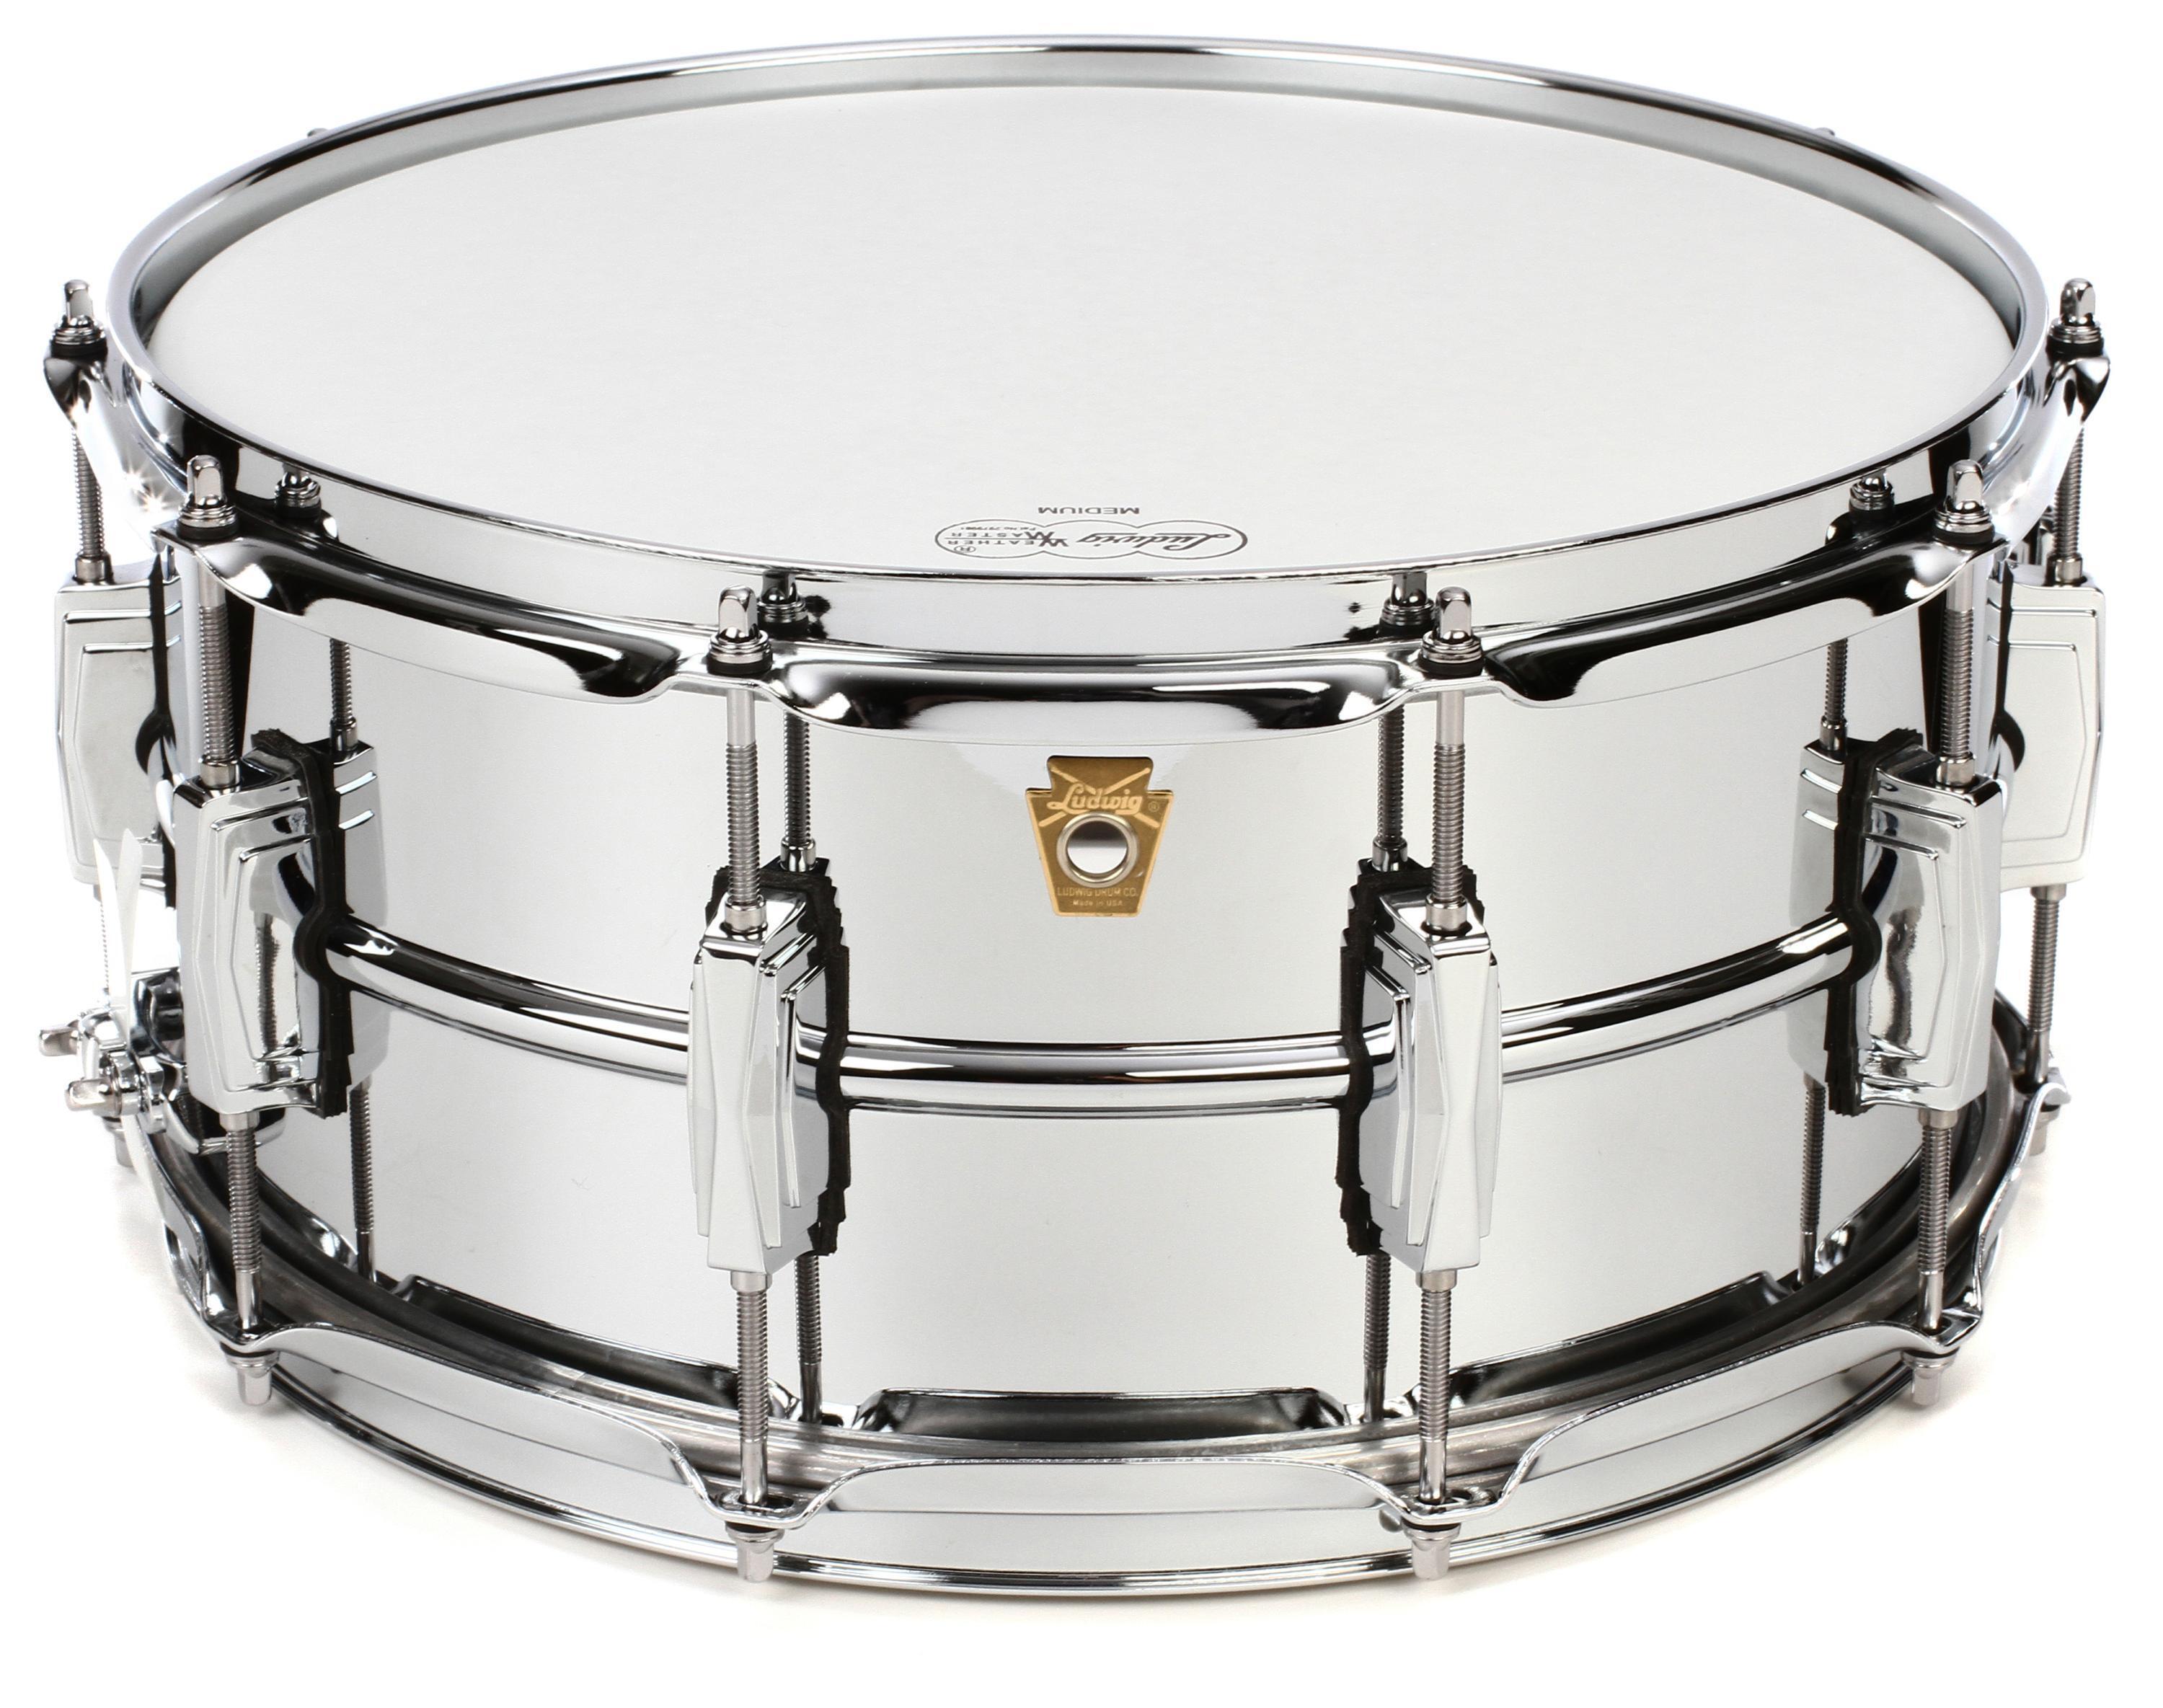 Ludwig Supraphonic LM402 6.5-inch x 14-inch Snare Drum - Smooth